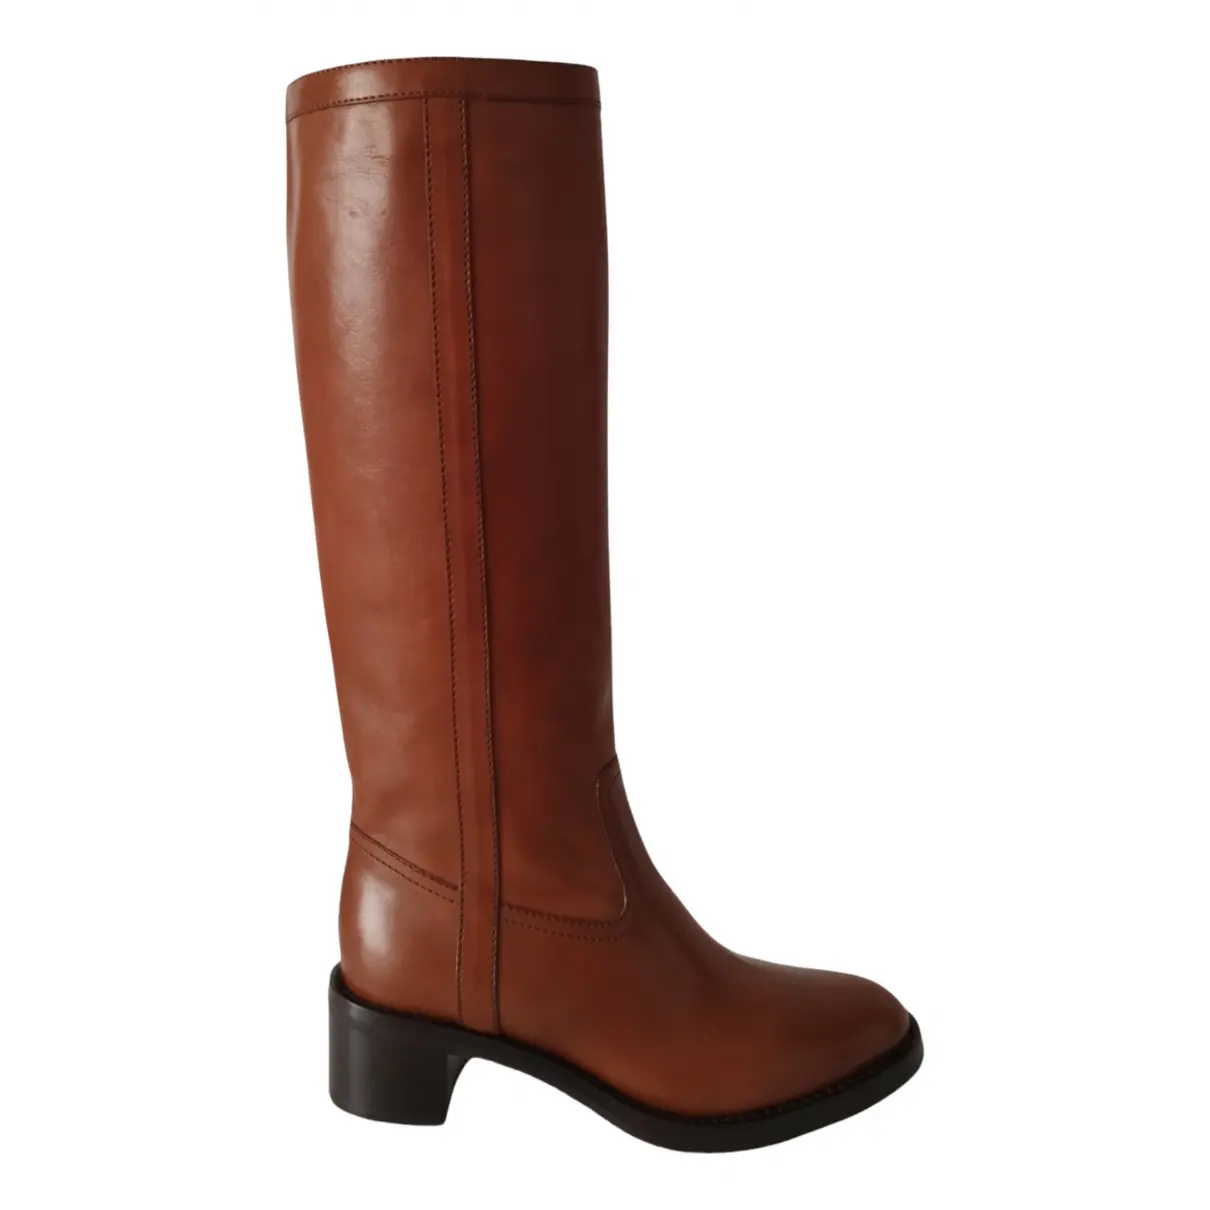 Folco leather riding boots Celine